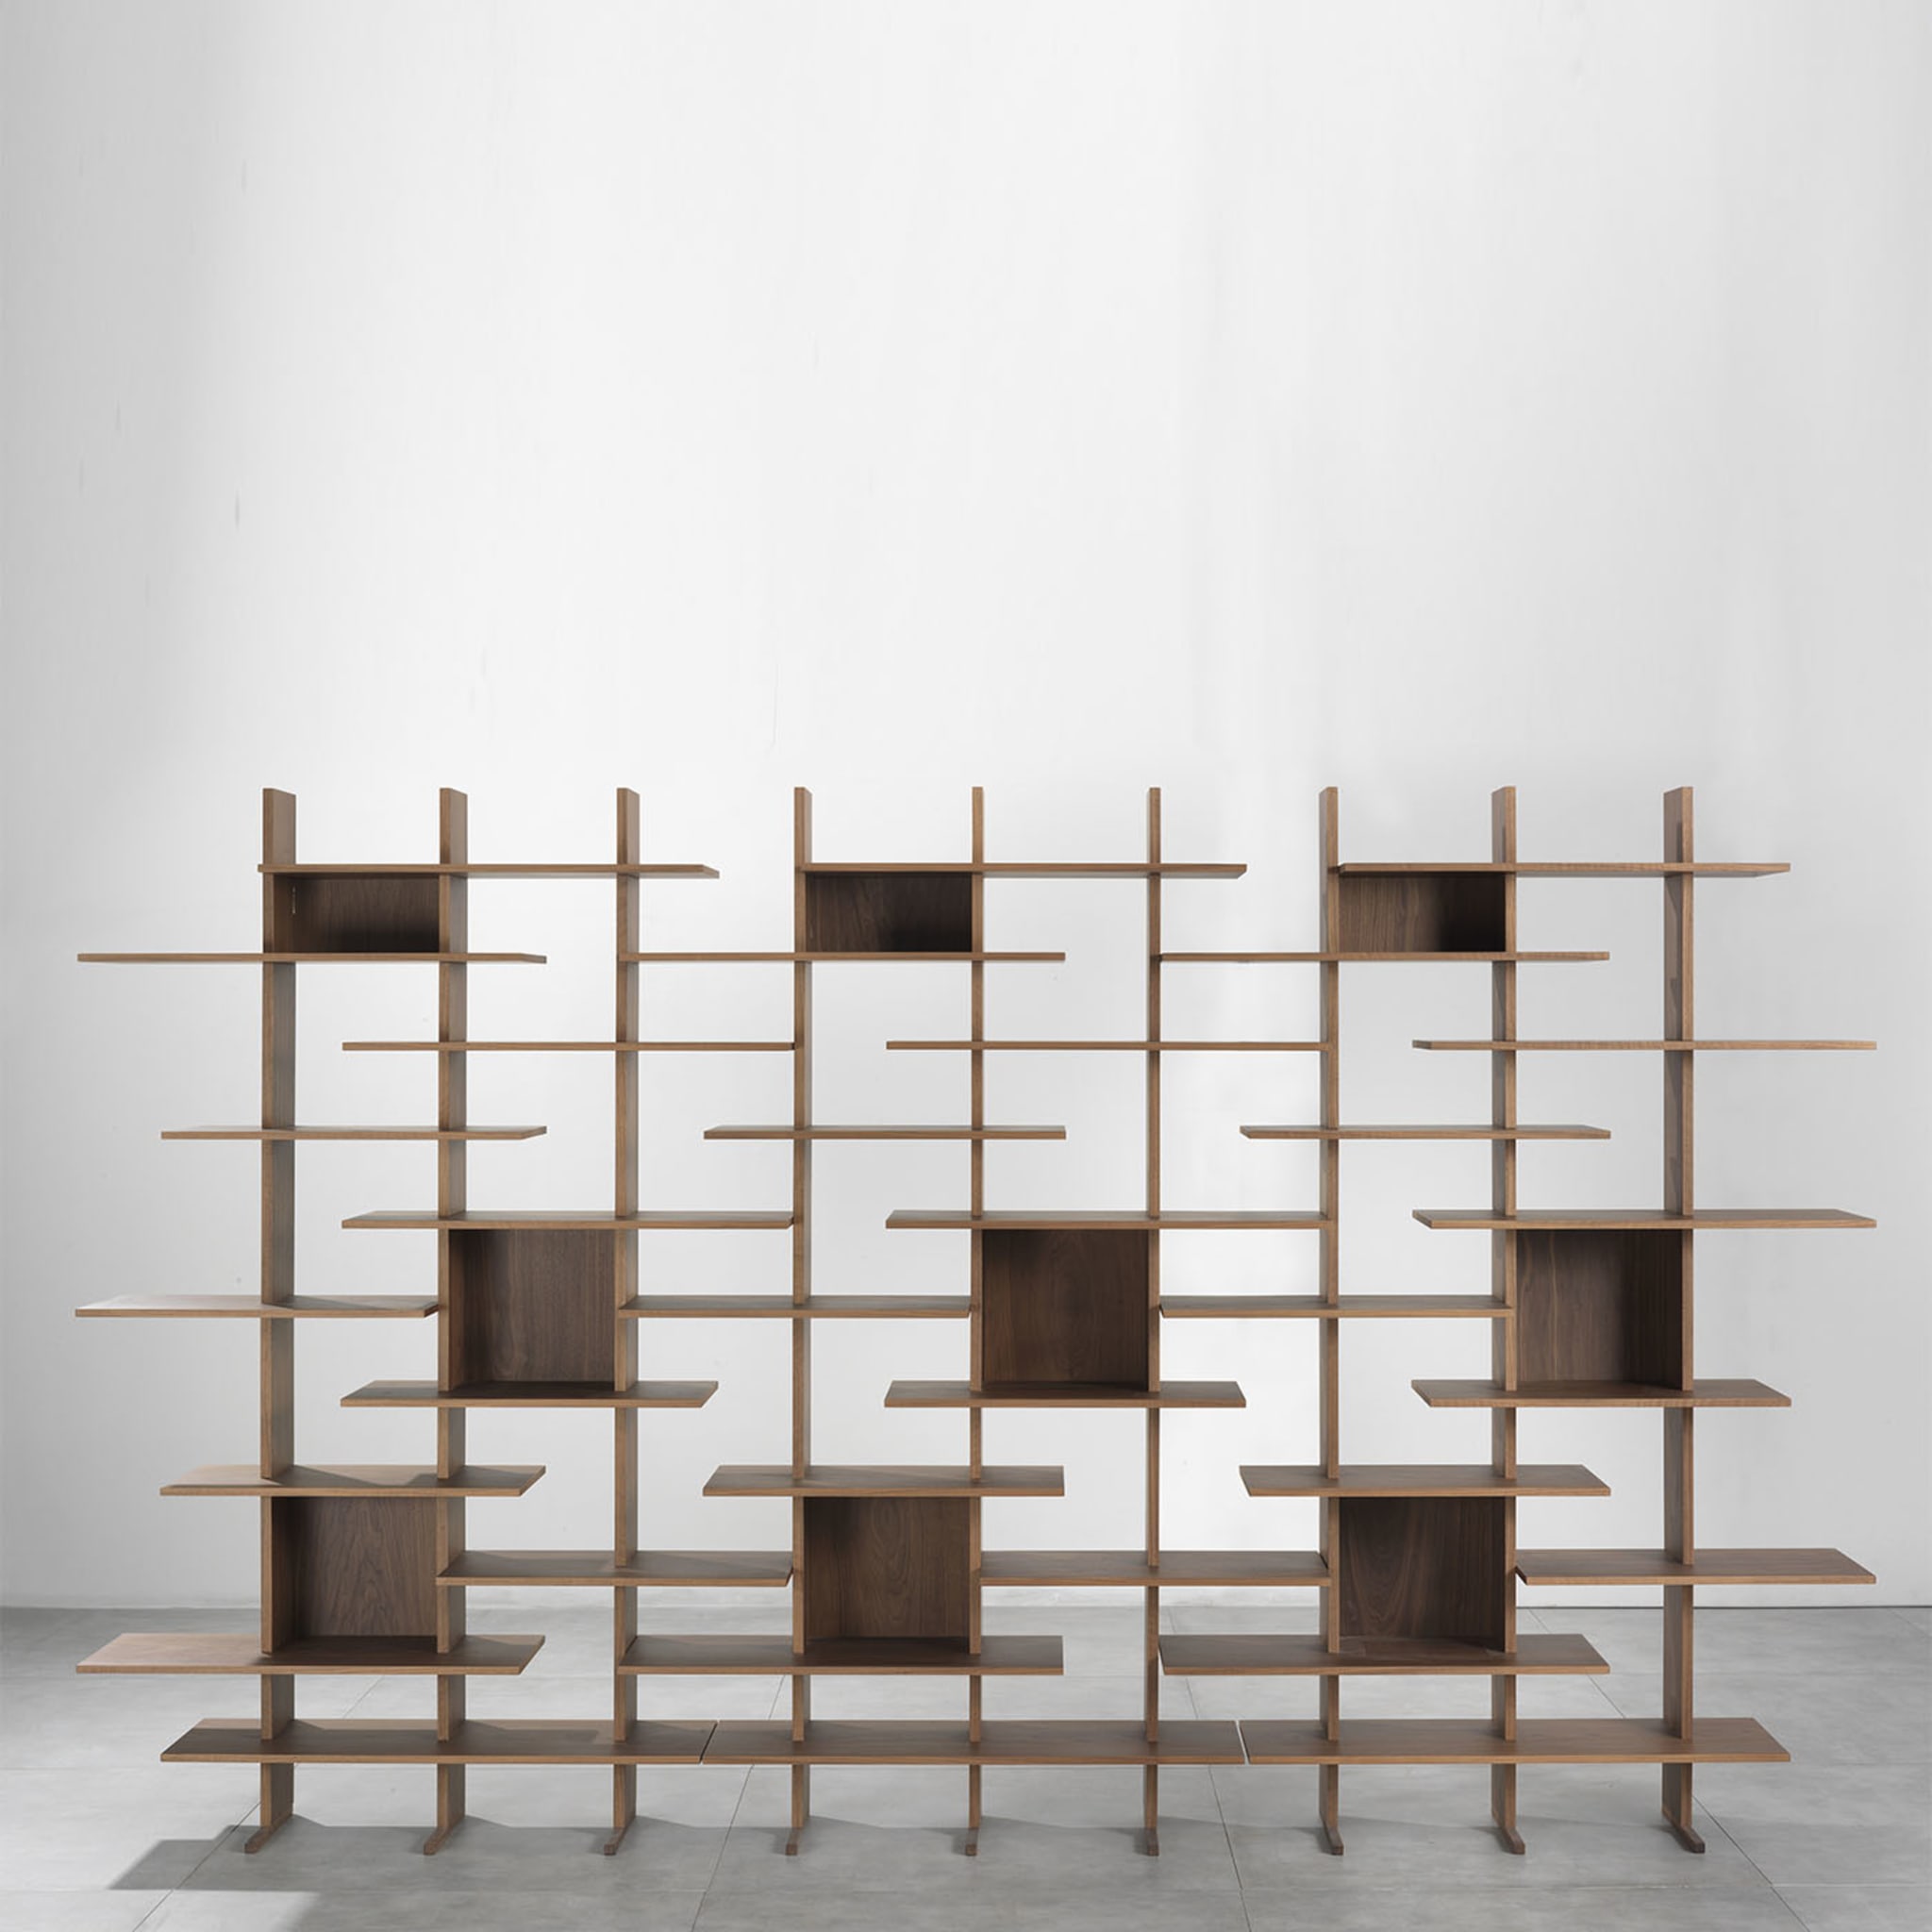 Elisabeth Bookcase #4 by Cesare Arosio and Beatrice Fanchini - Alternative view 3